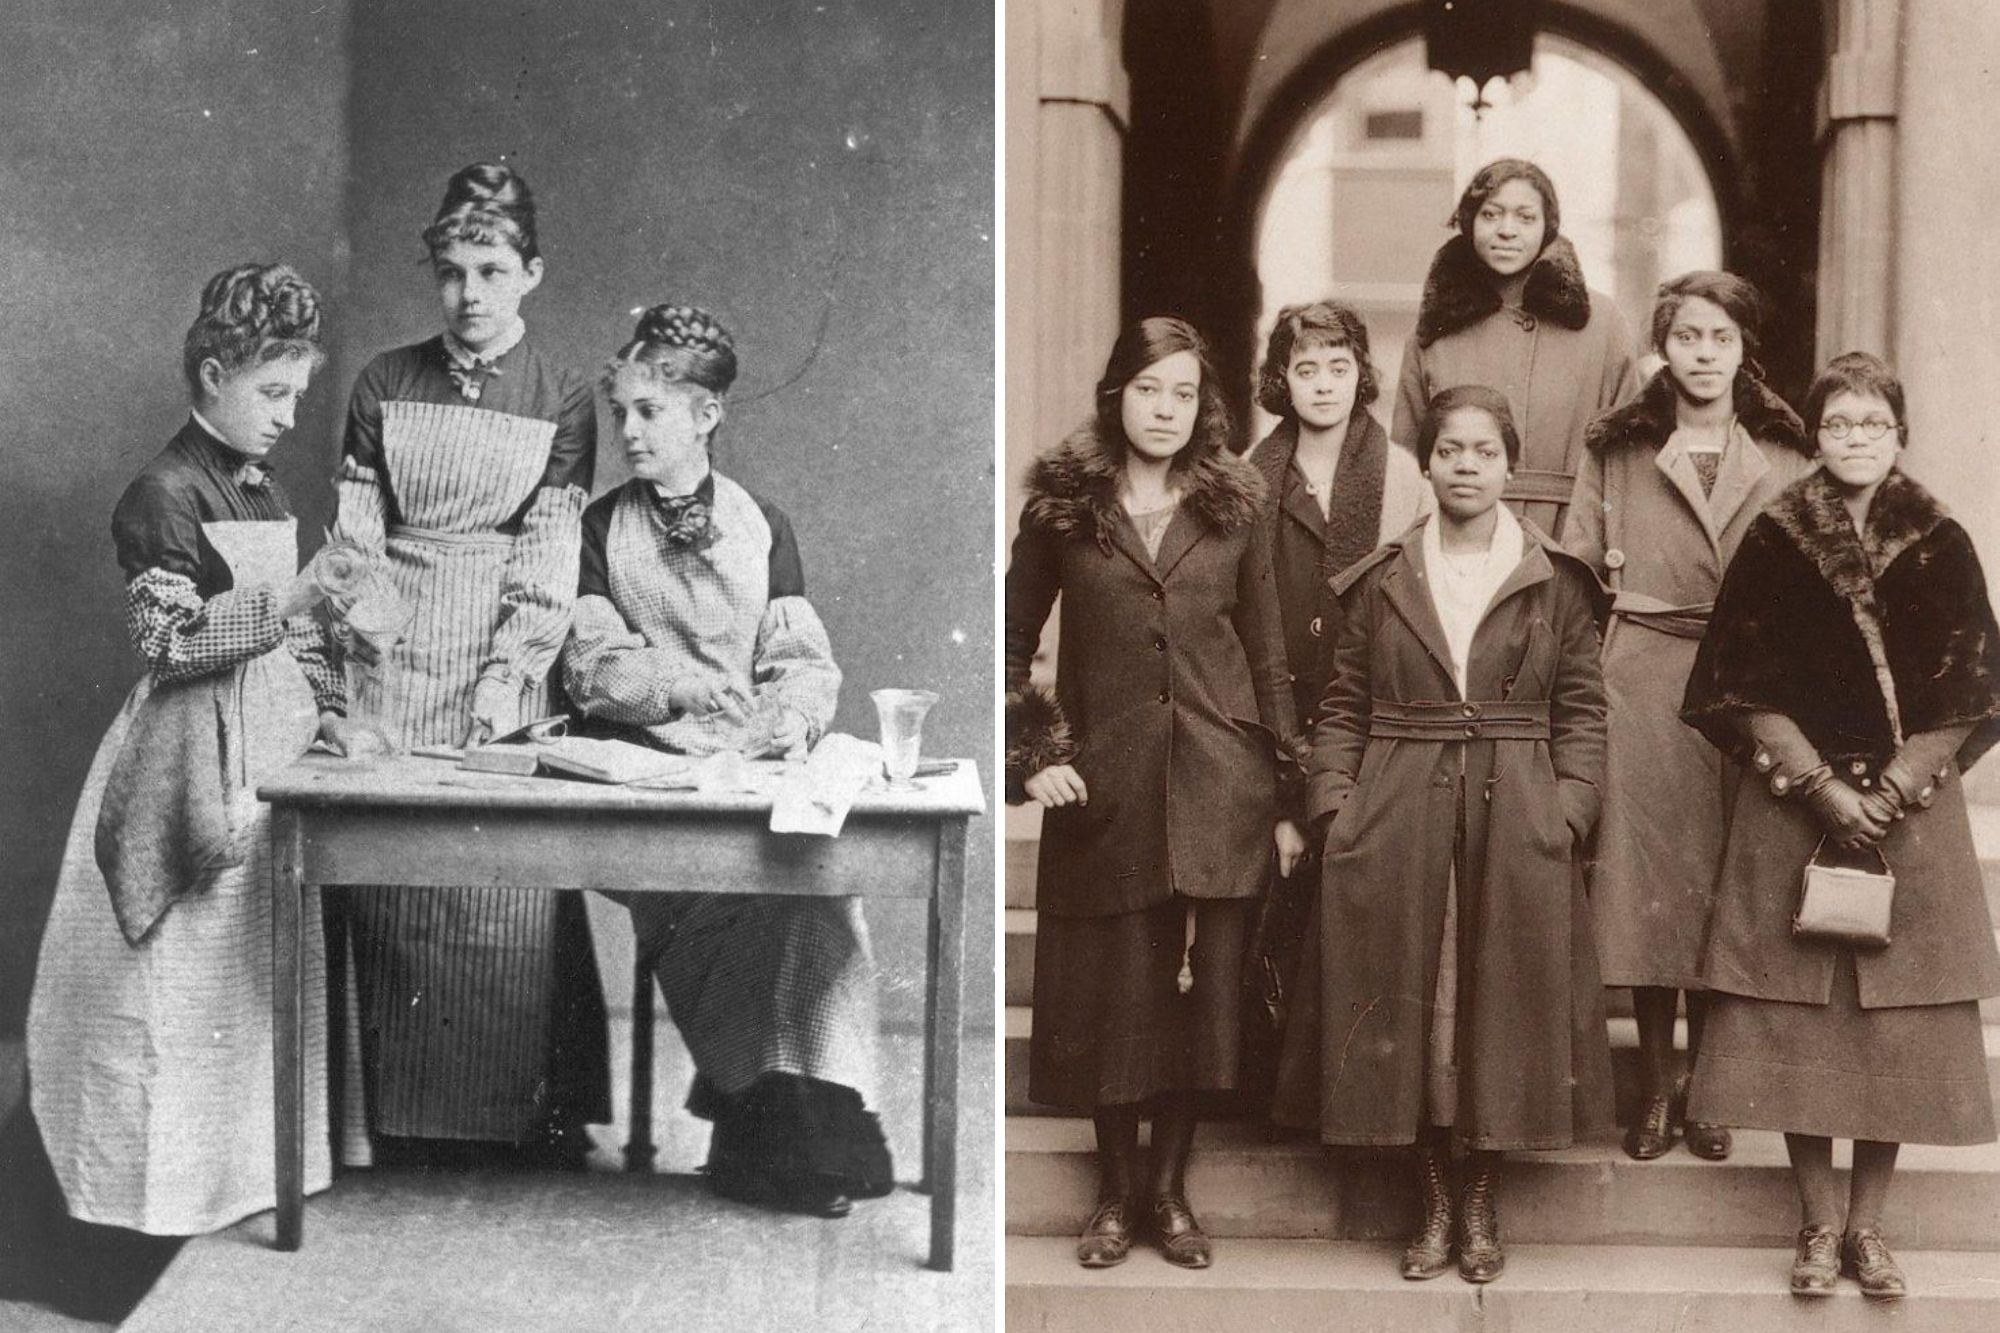 Two images from Penn Archives, on the left are the first three women enrolled at Penn at a desk with chemistry experiment equipement; on the right, six members of a Black sorority in the 1940s